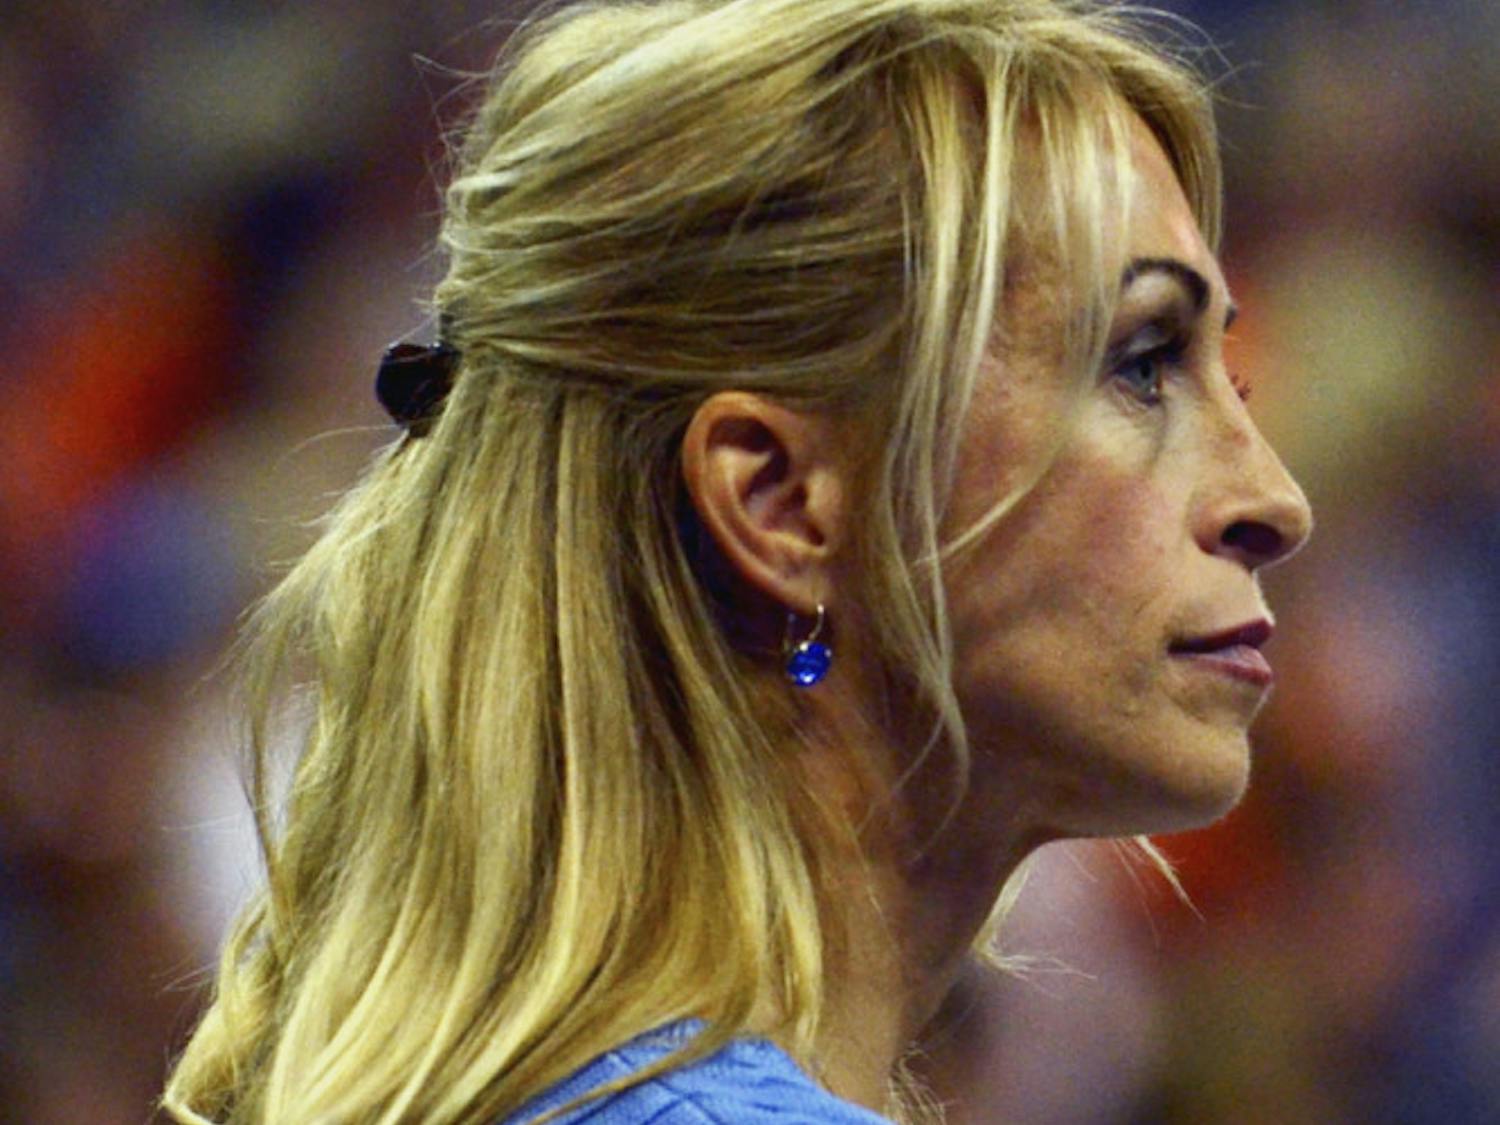 Rhonda Faehn watches her teammates compete during Florida's win against Georgia on Jan. 30.